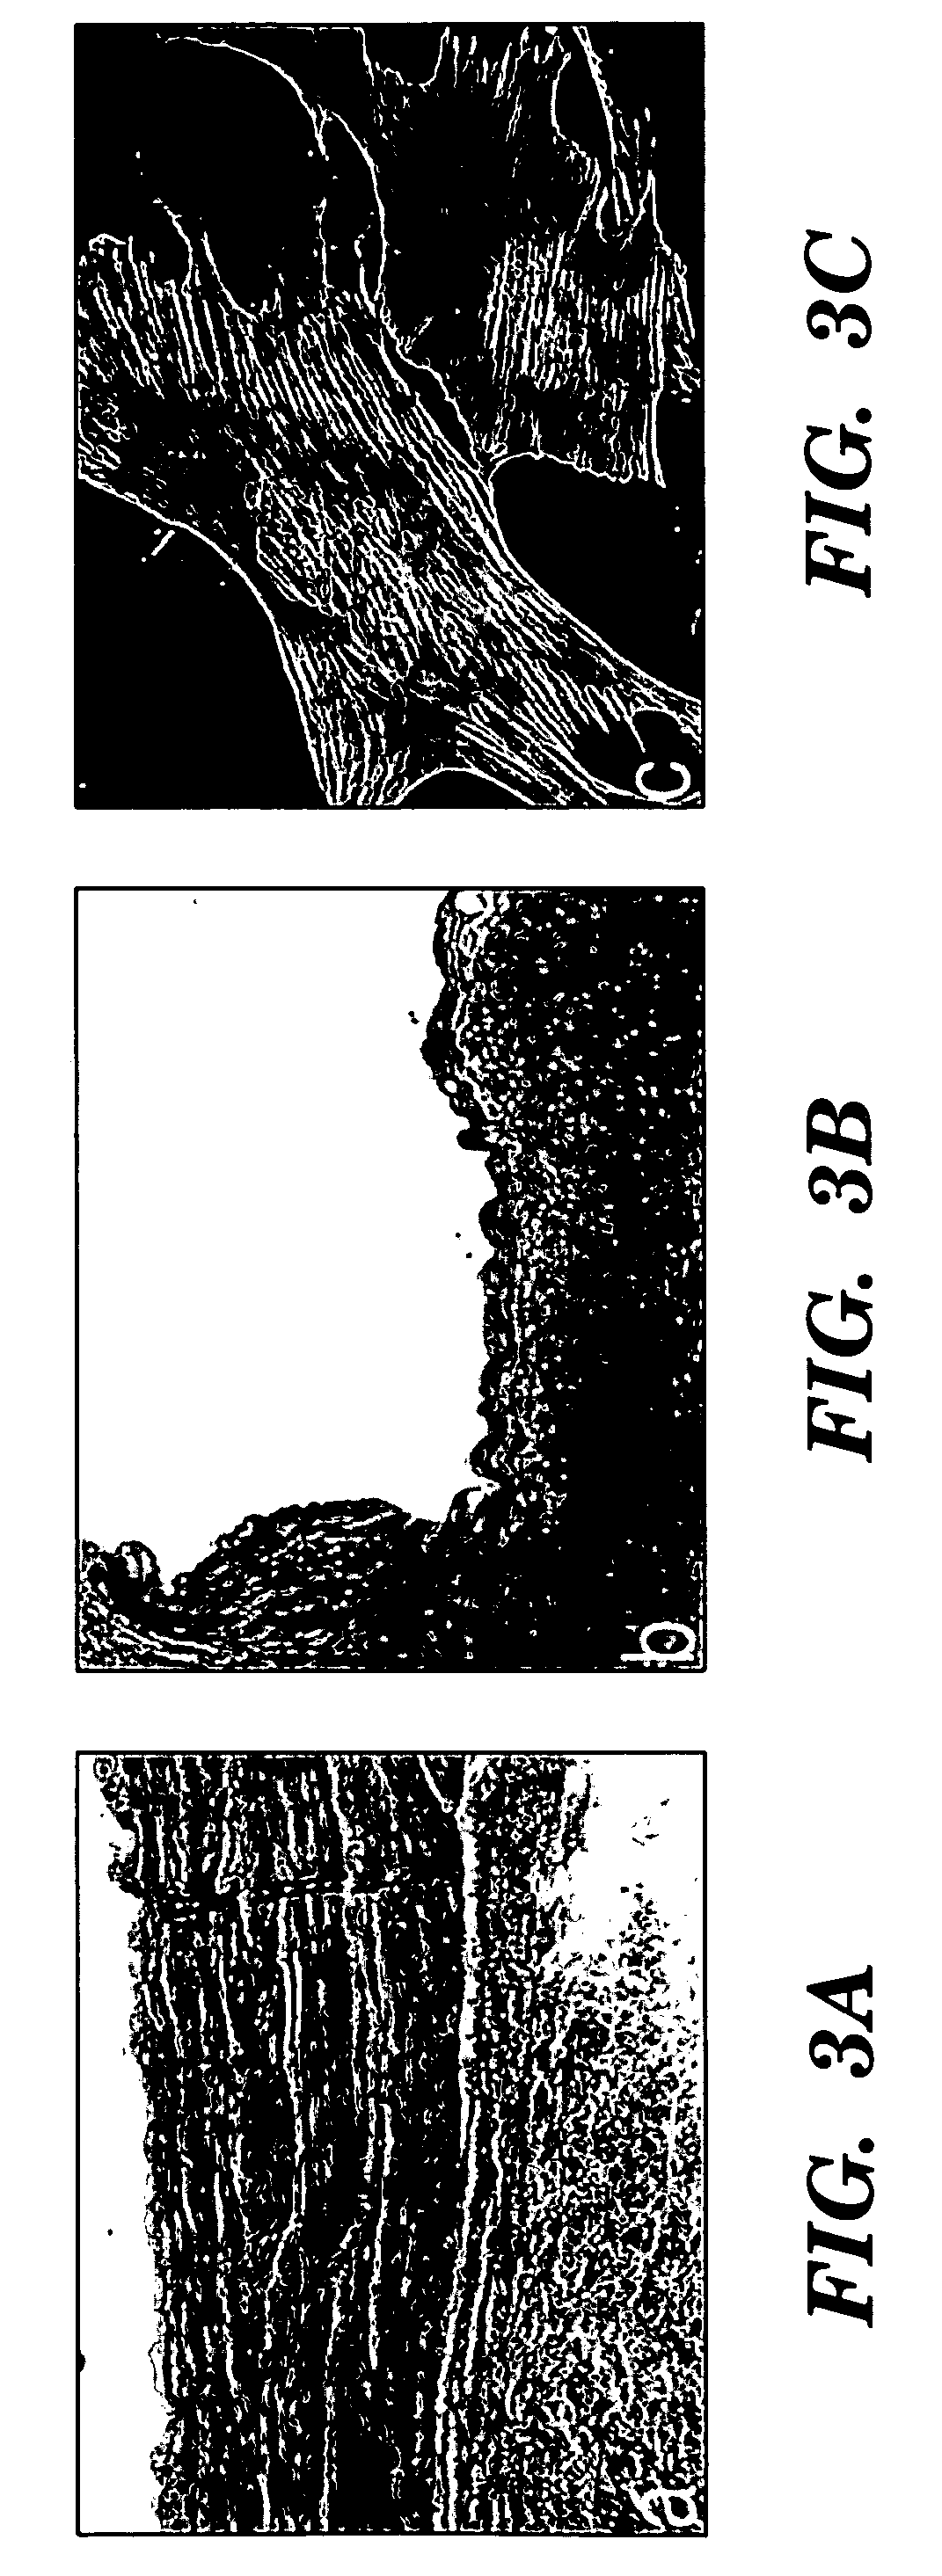 Method of isolating cells from umbilical cord